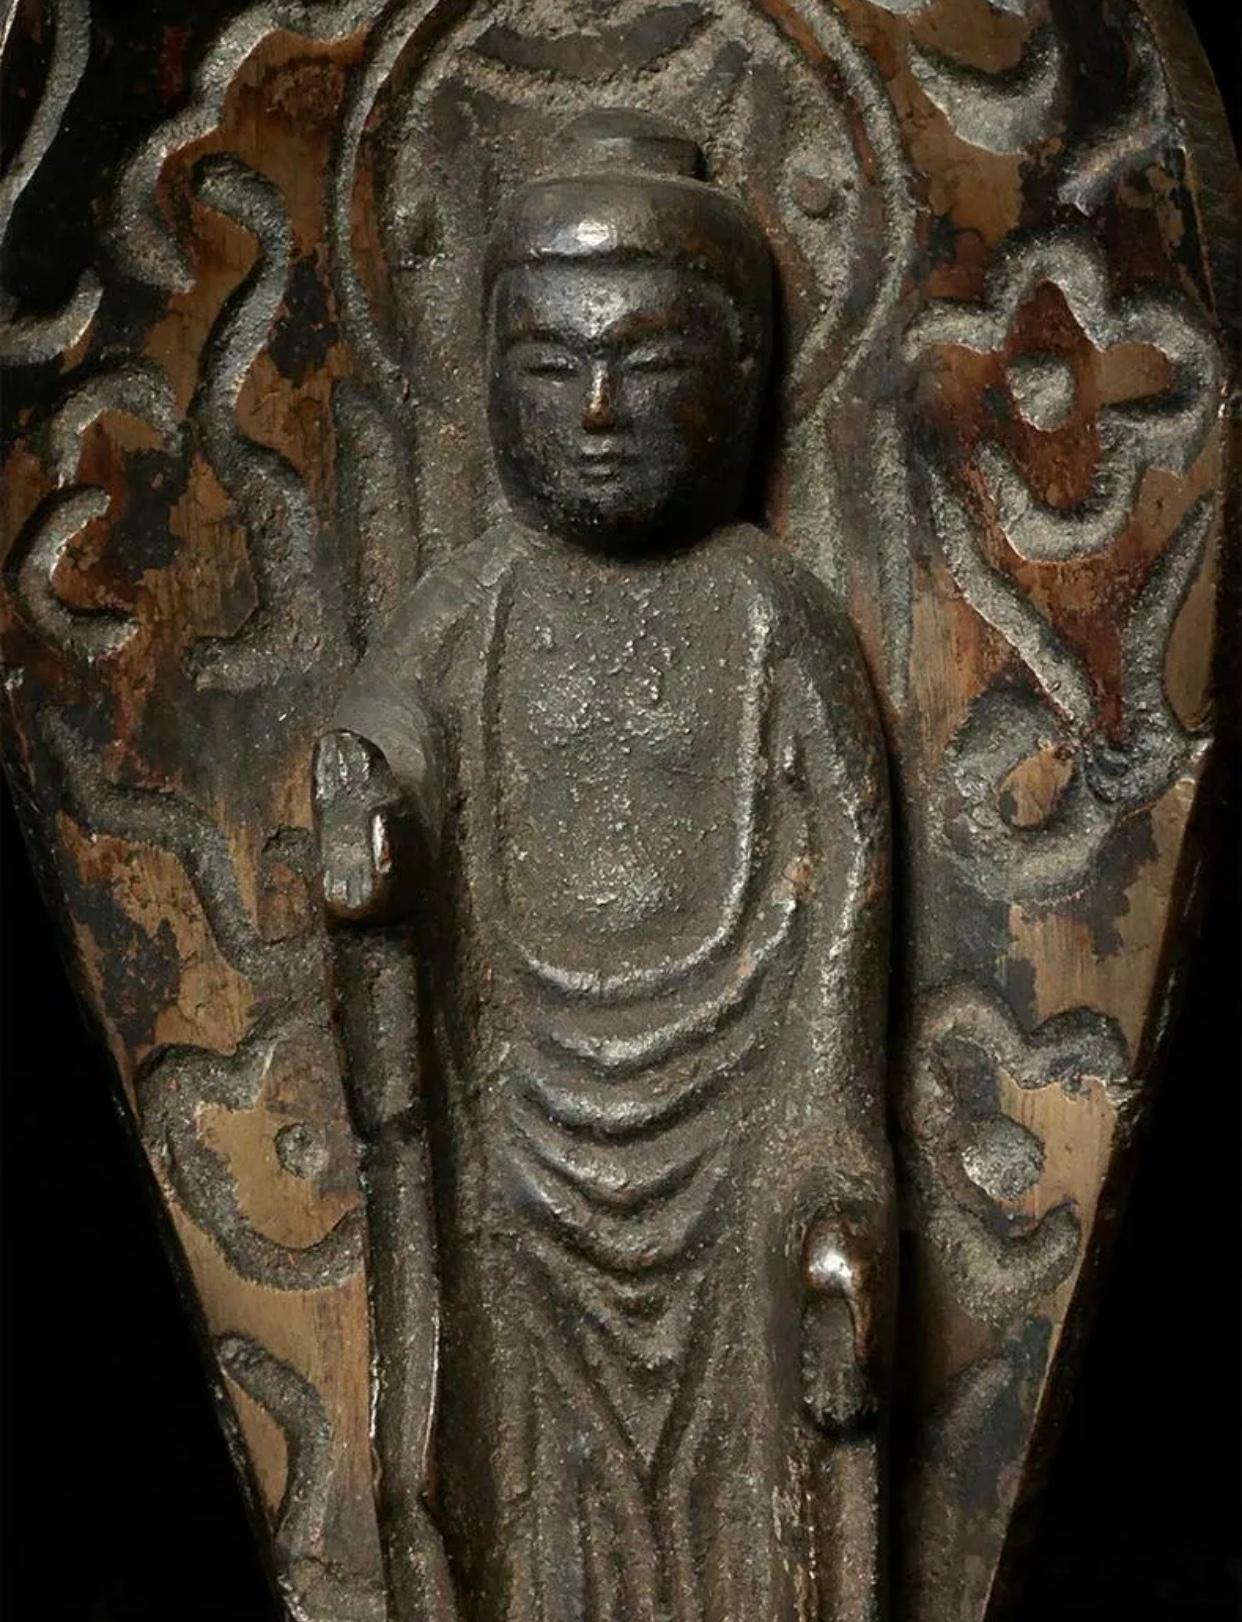 Japanese Momoyama period solid bronze cast diminutive Buddha sculpture. The piece dates from the 16th-17th century, circa 1450-1500, and is in remarkable condition with age-appropriate wear to the patina.